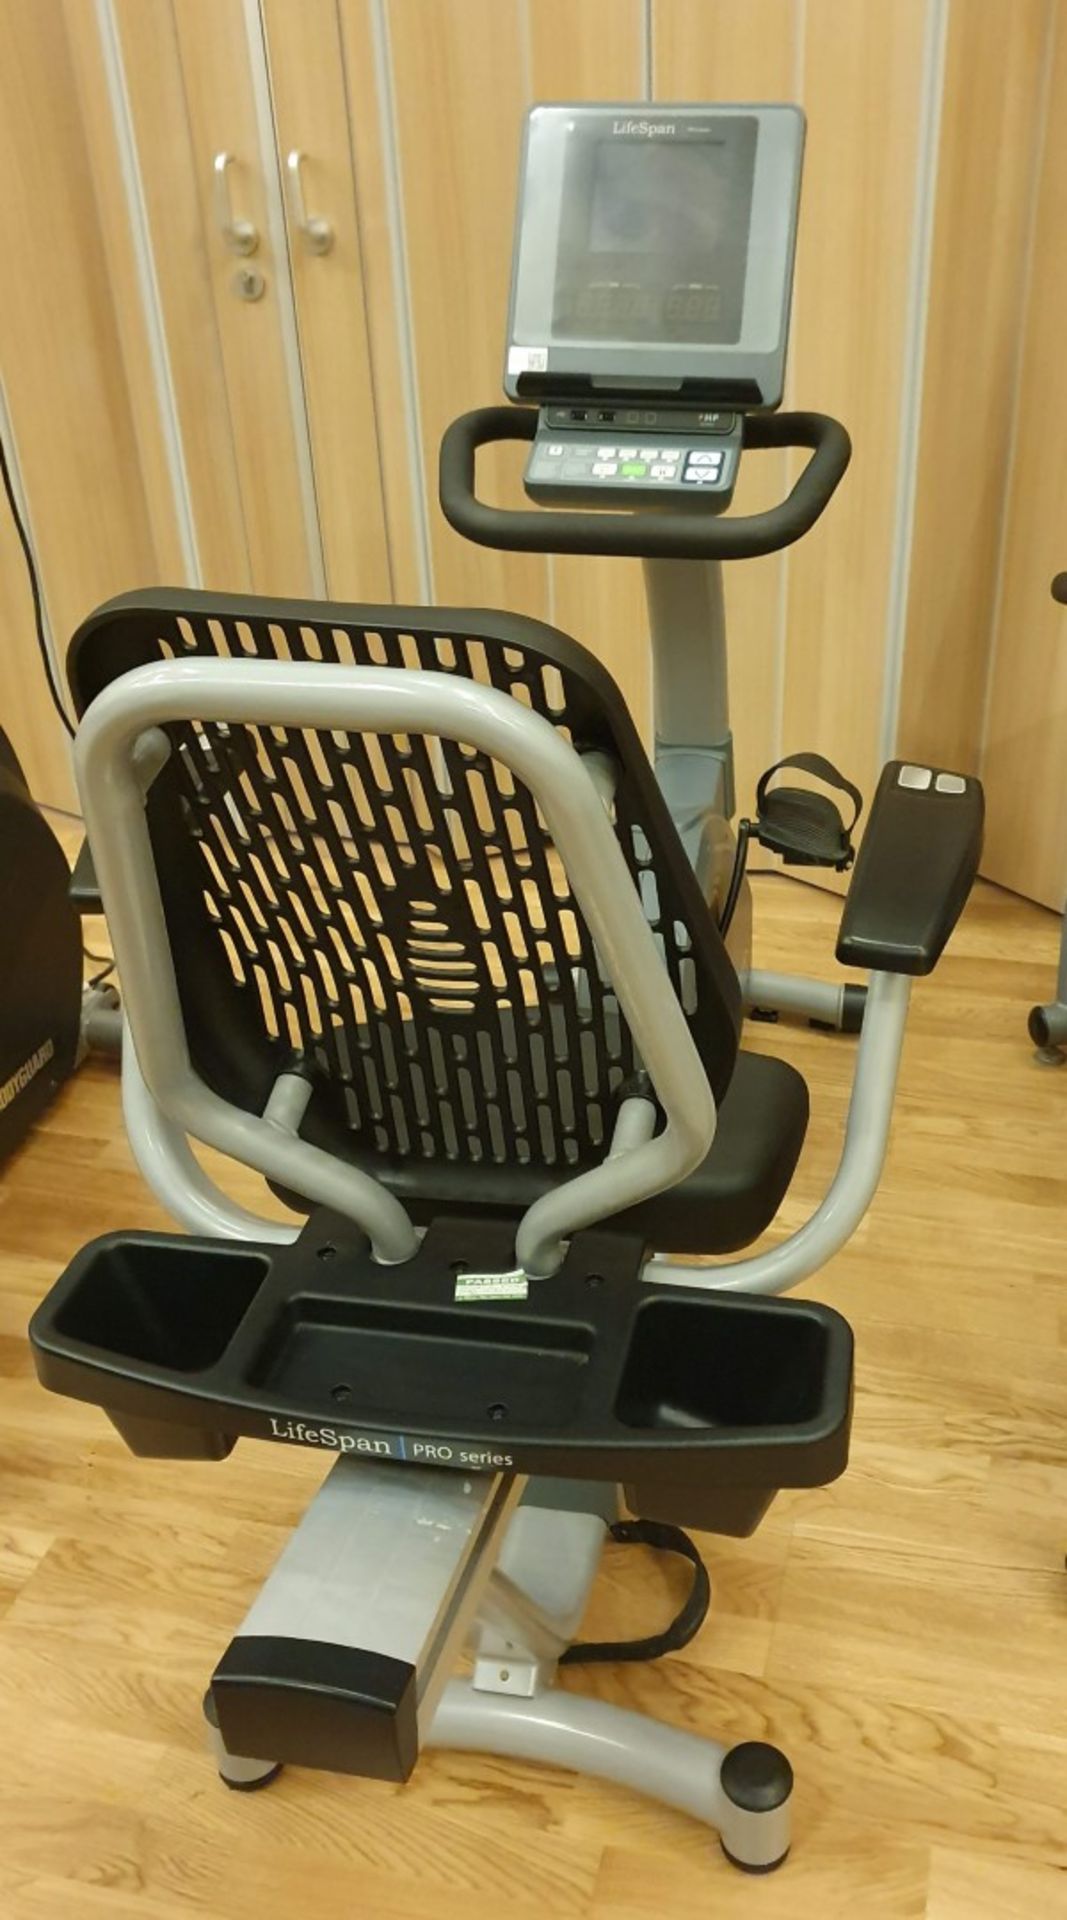 1 x Lifespan R7000 Pro Series Excercise Bike With USB Connectivity - Approx RRP £1,500 - CL552 -